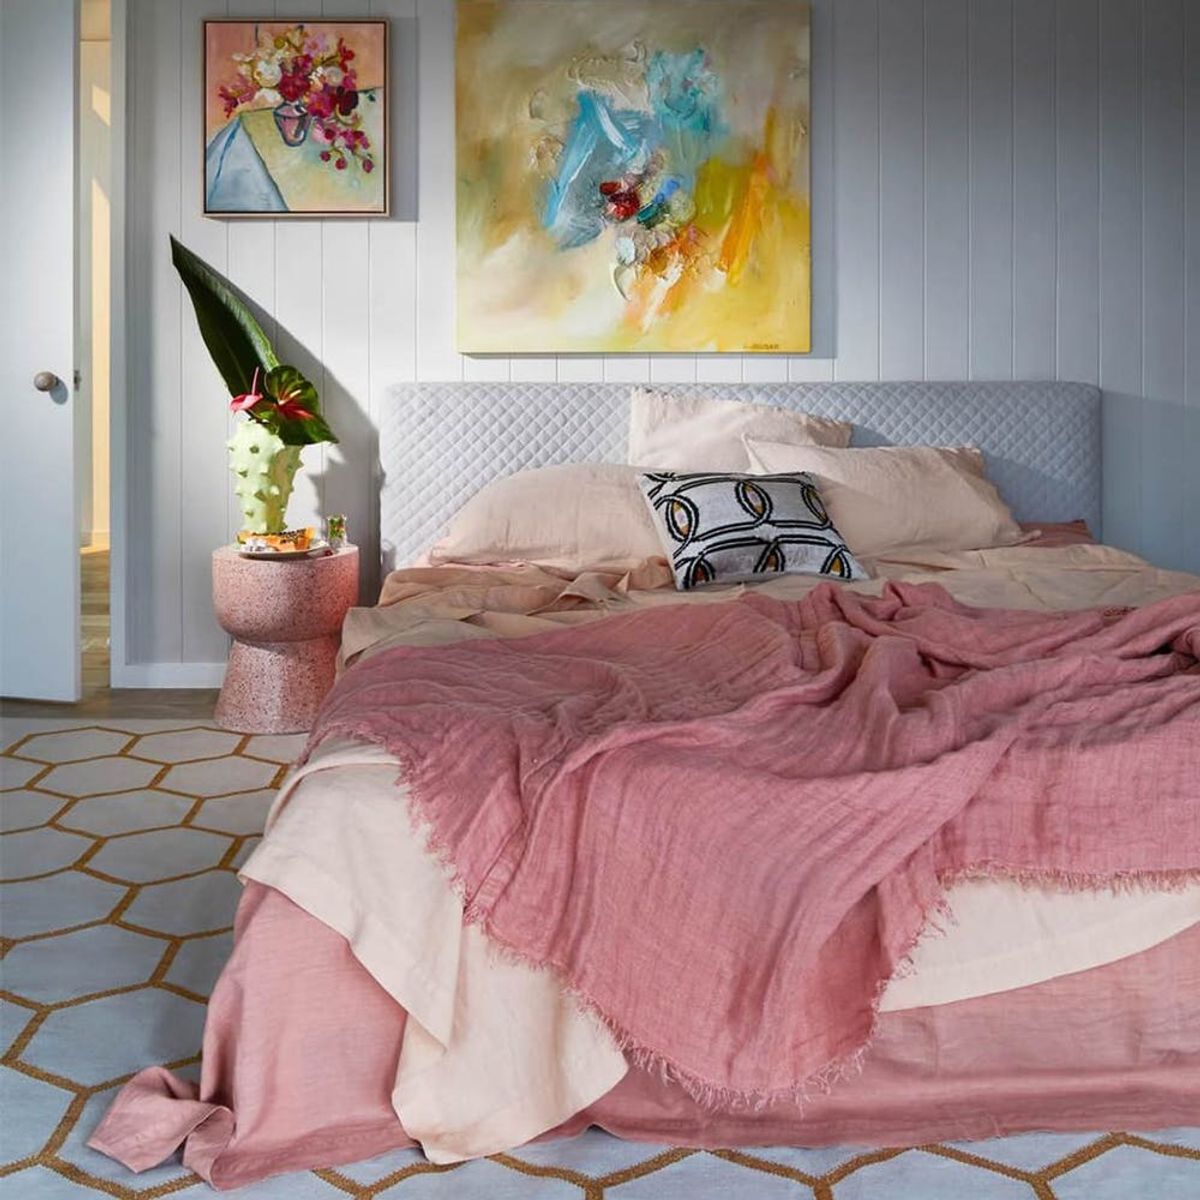 10 Stores We’re Hitting Up for the Latest Bedding Trend